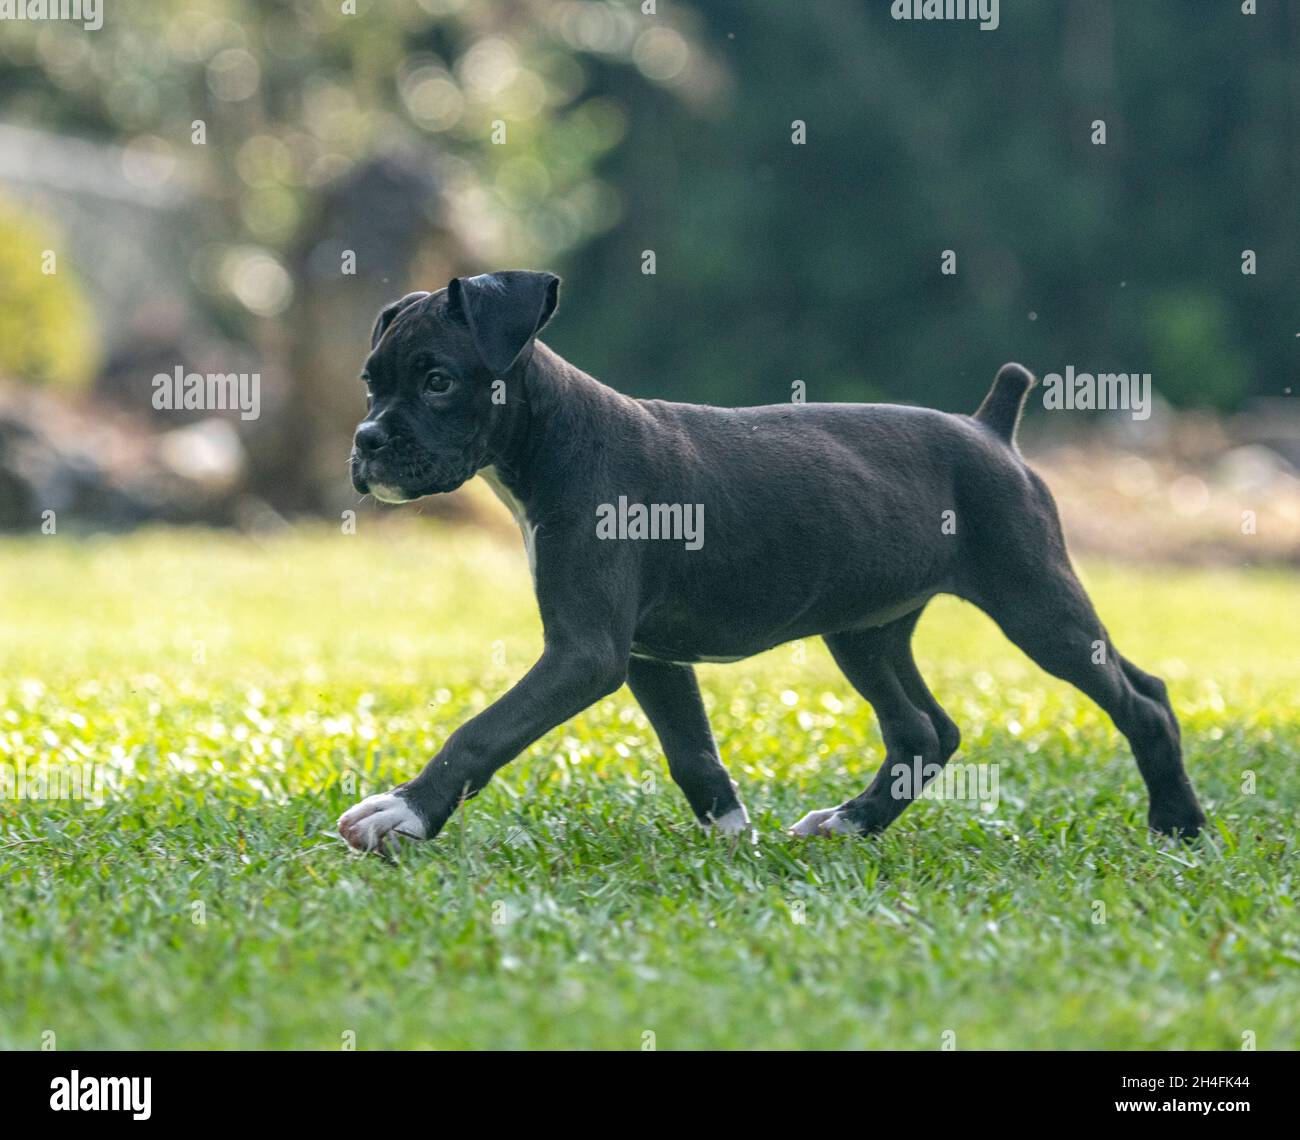 Alert 9 week old black Boxer dog puppy plays on grass lawn Stock Photo